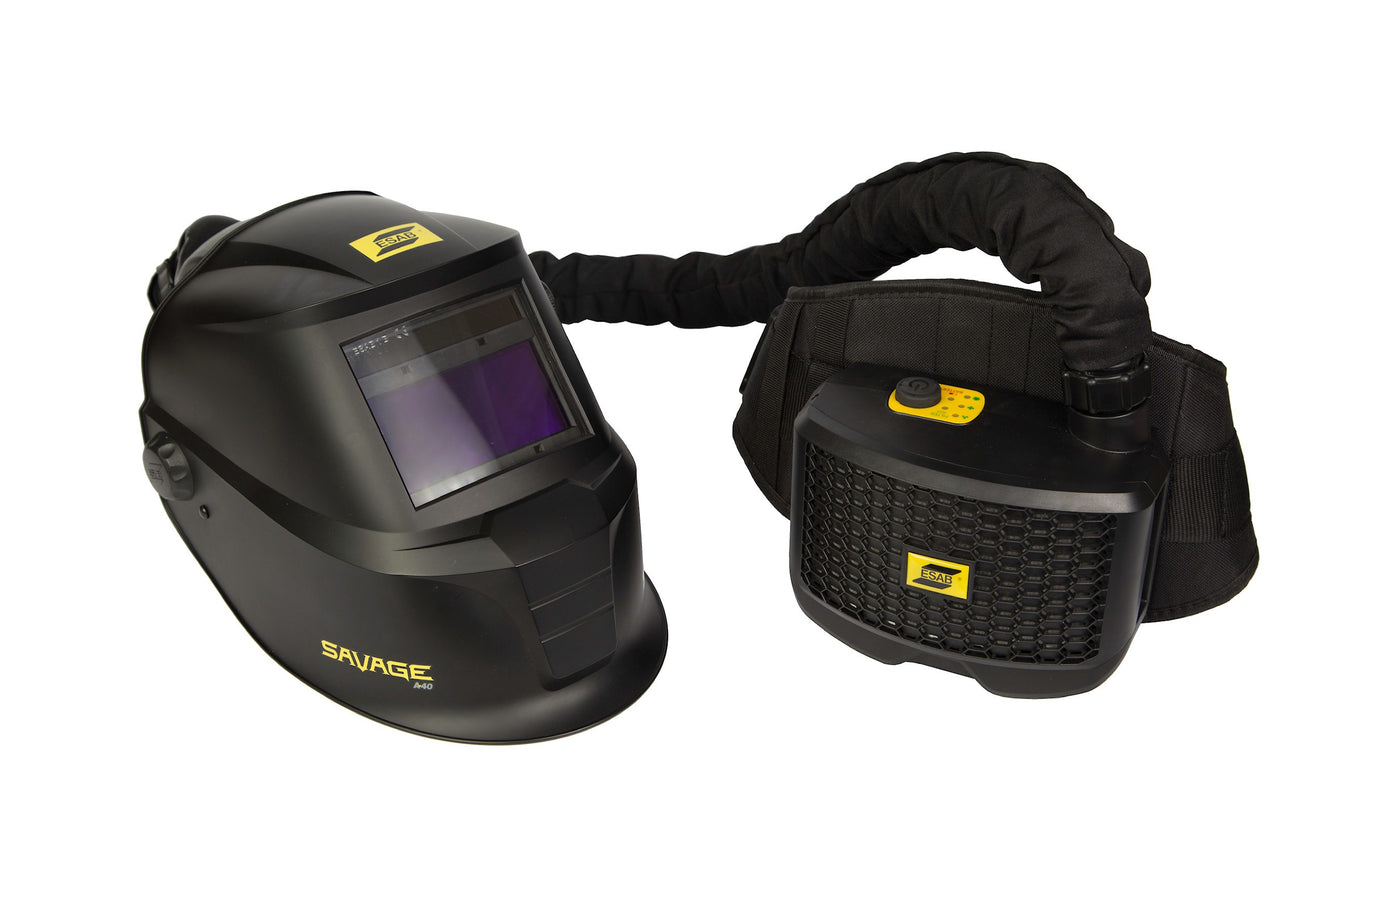 ESAB Savage A40 Welding Helmet with Air complete ESAB PAPR Unit 1m Package